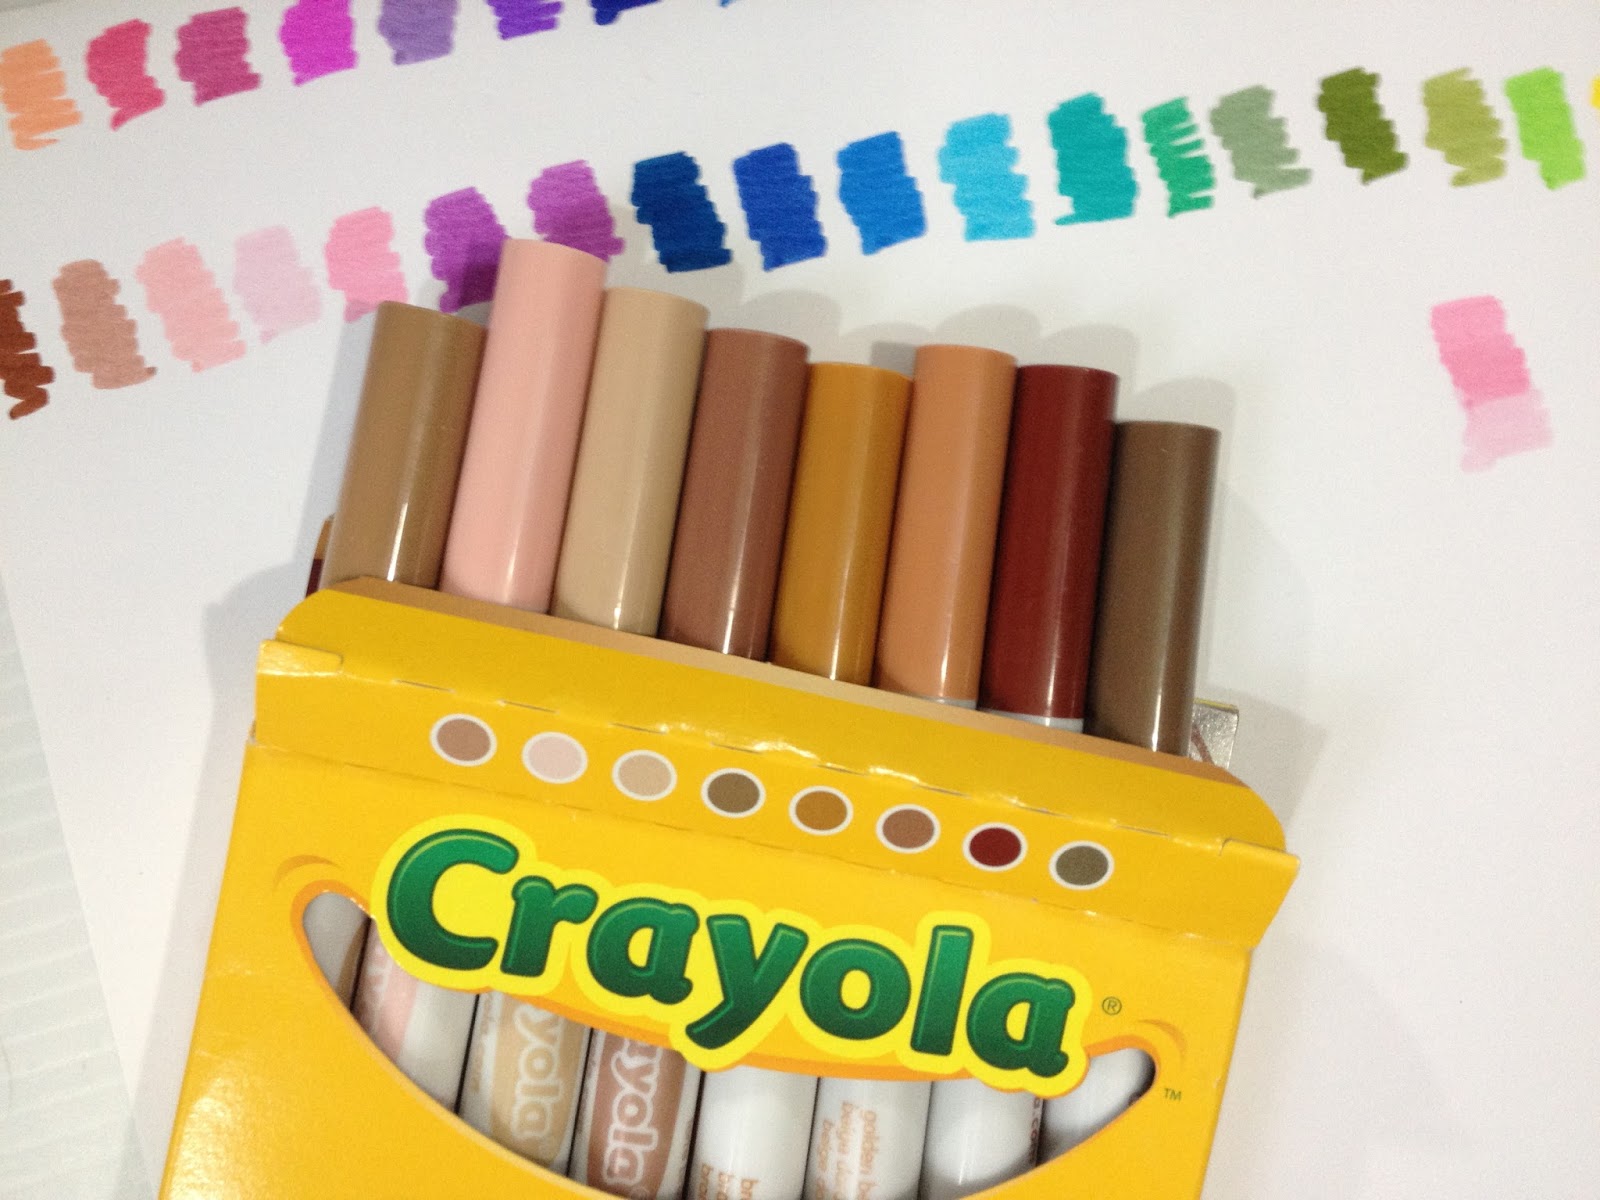 Crayola Supertips 100 Set Swatch and Review 